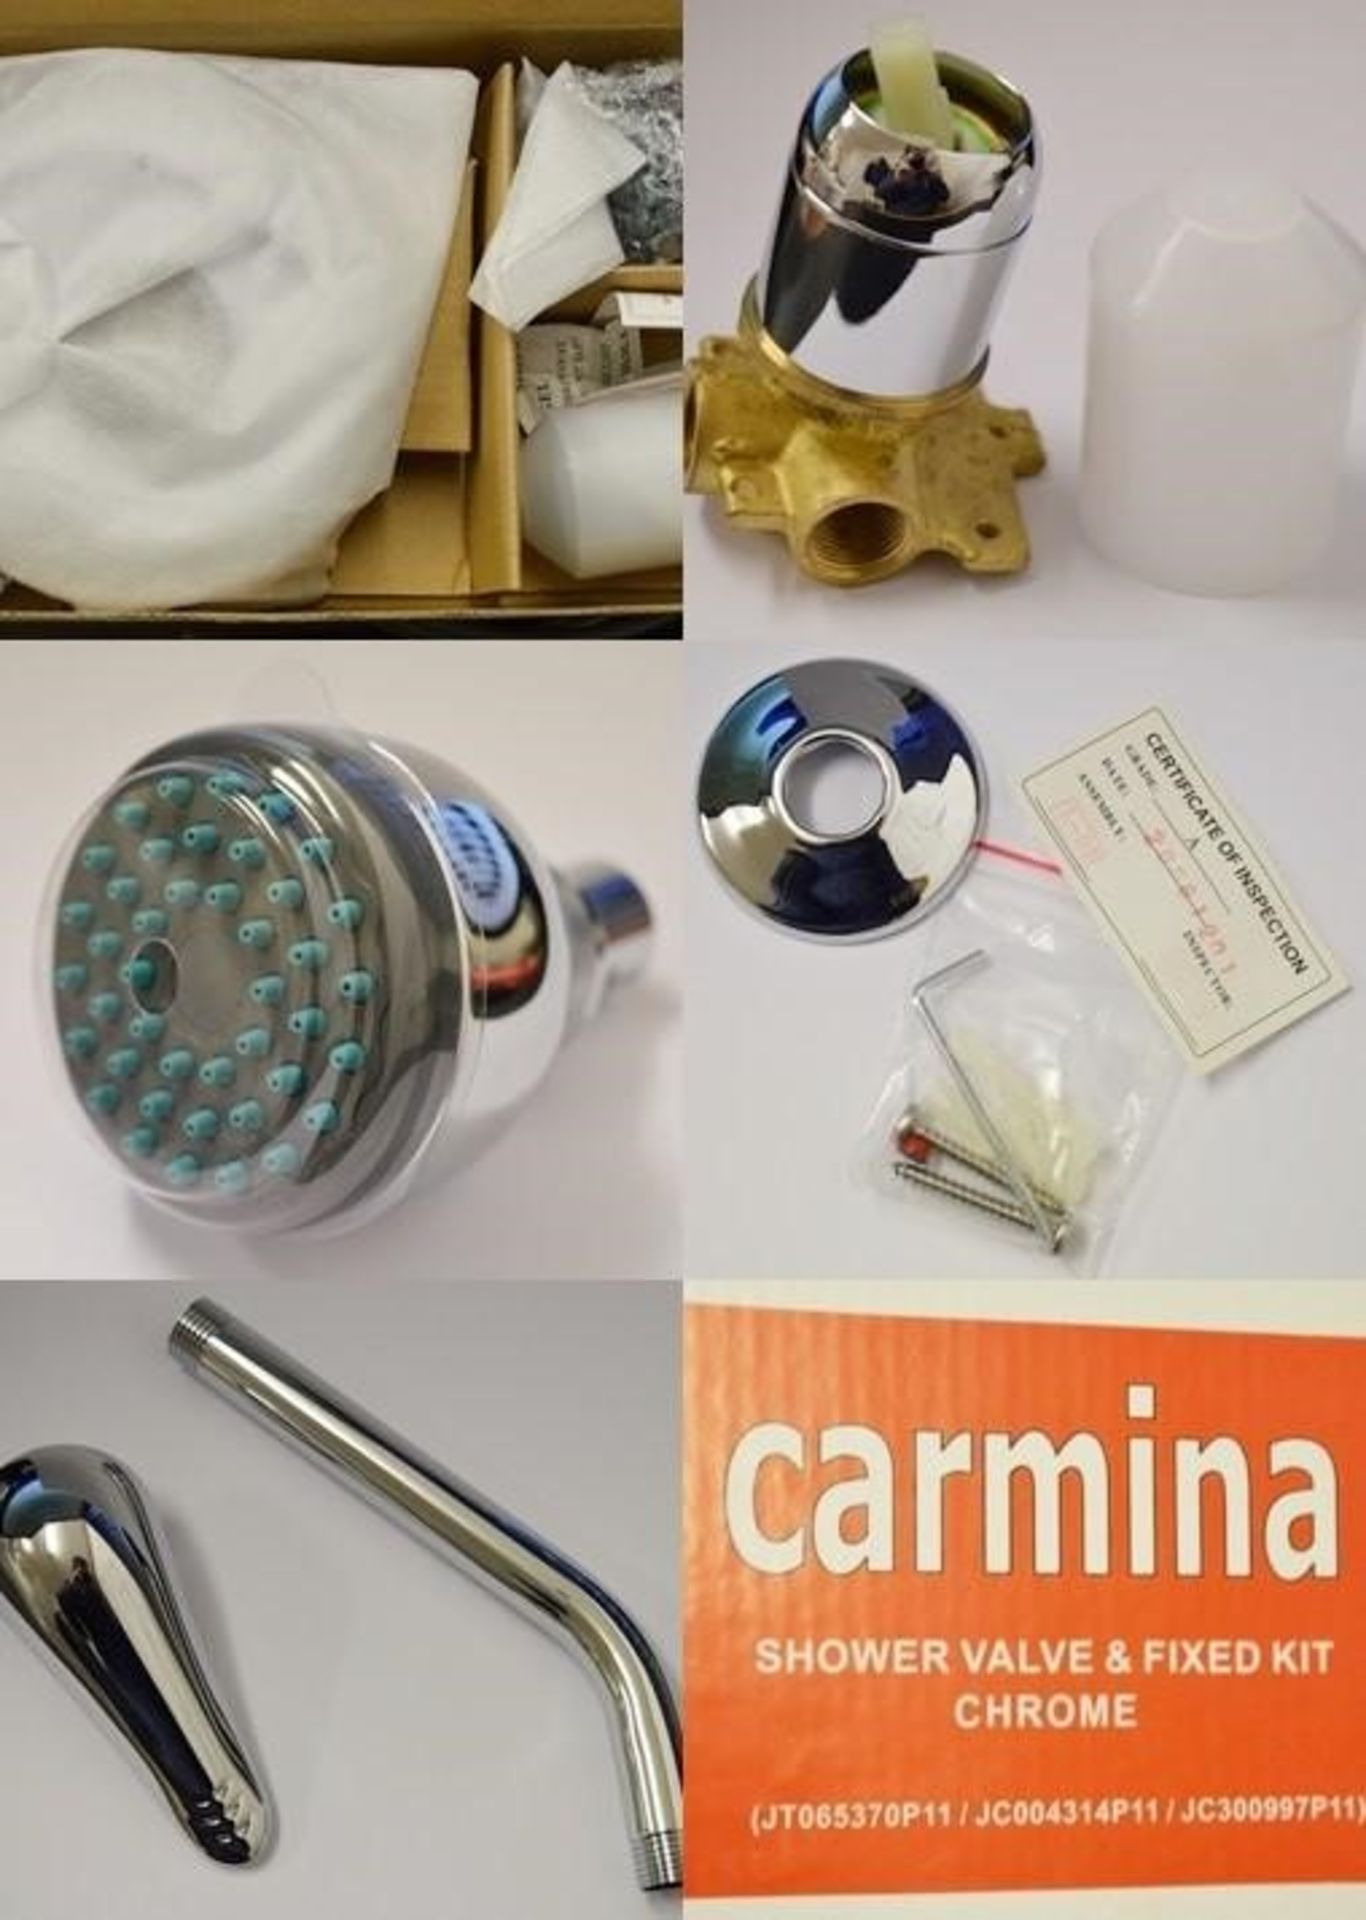 3 x Carmina Shower Valve Kits - Each Kit Contains Chrome Shower Head, Fixed Arm and Manual Control - - Image 7 of 13